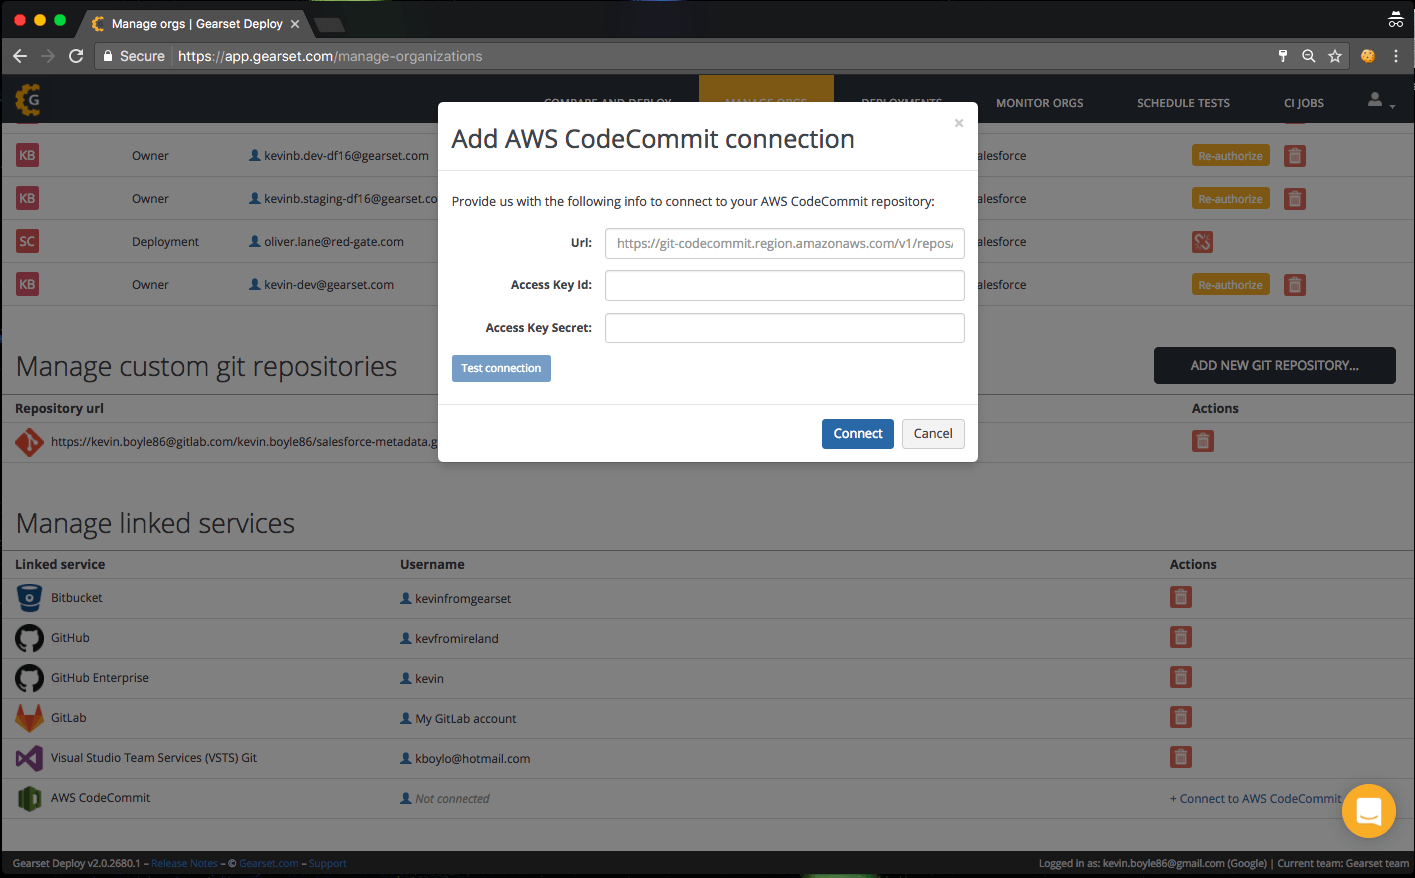 Adding AWS CodeCommit to Gearset